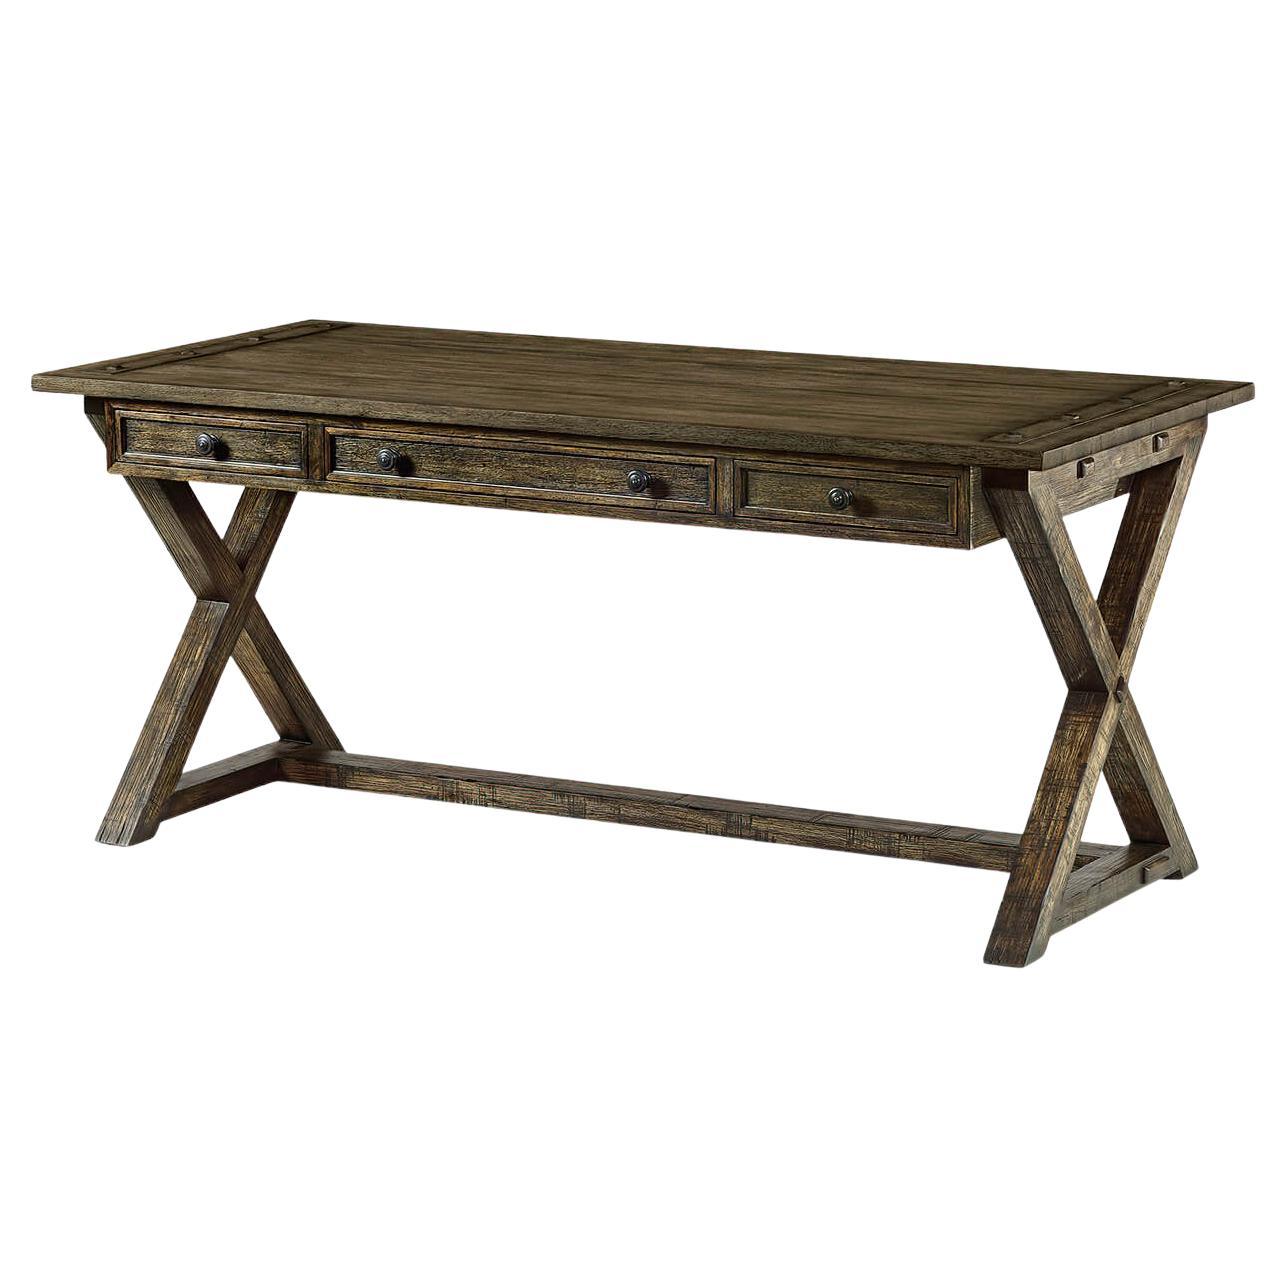 Rustic Country Walnut Desk, Driftwood Finish For Sale